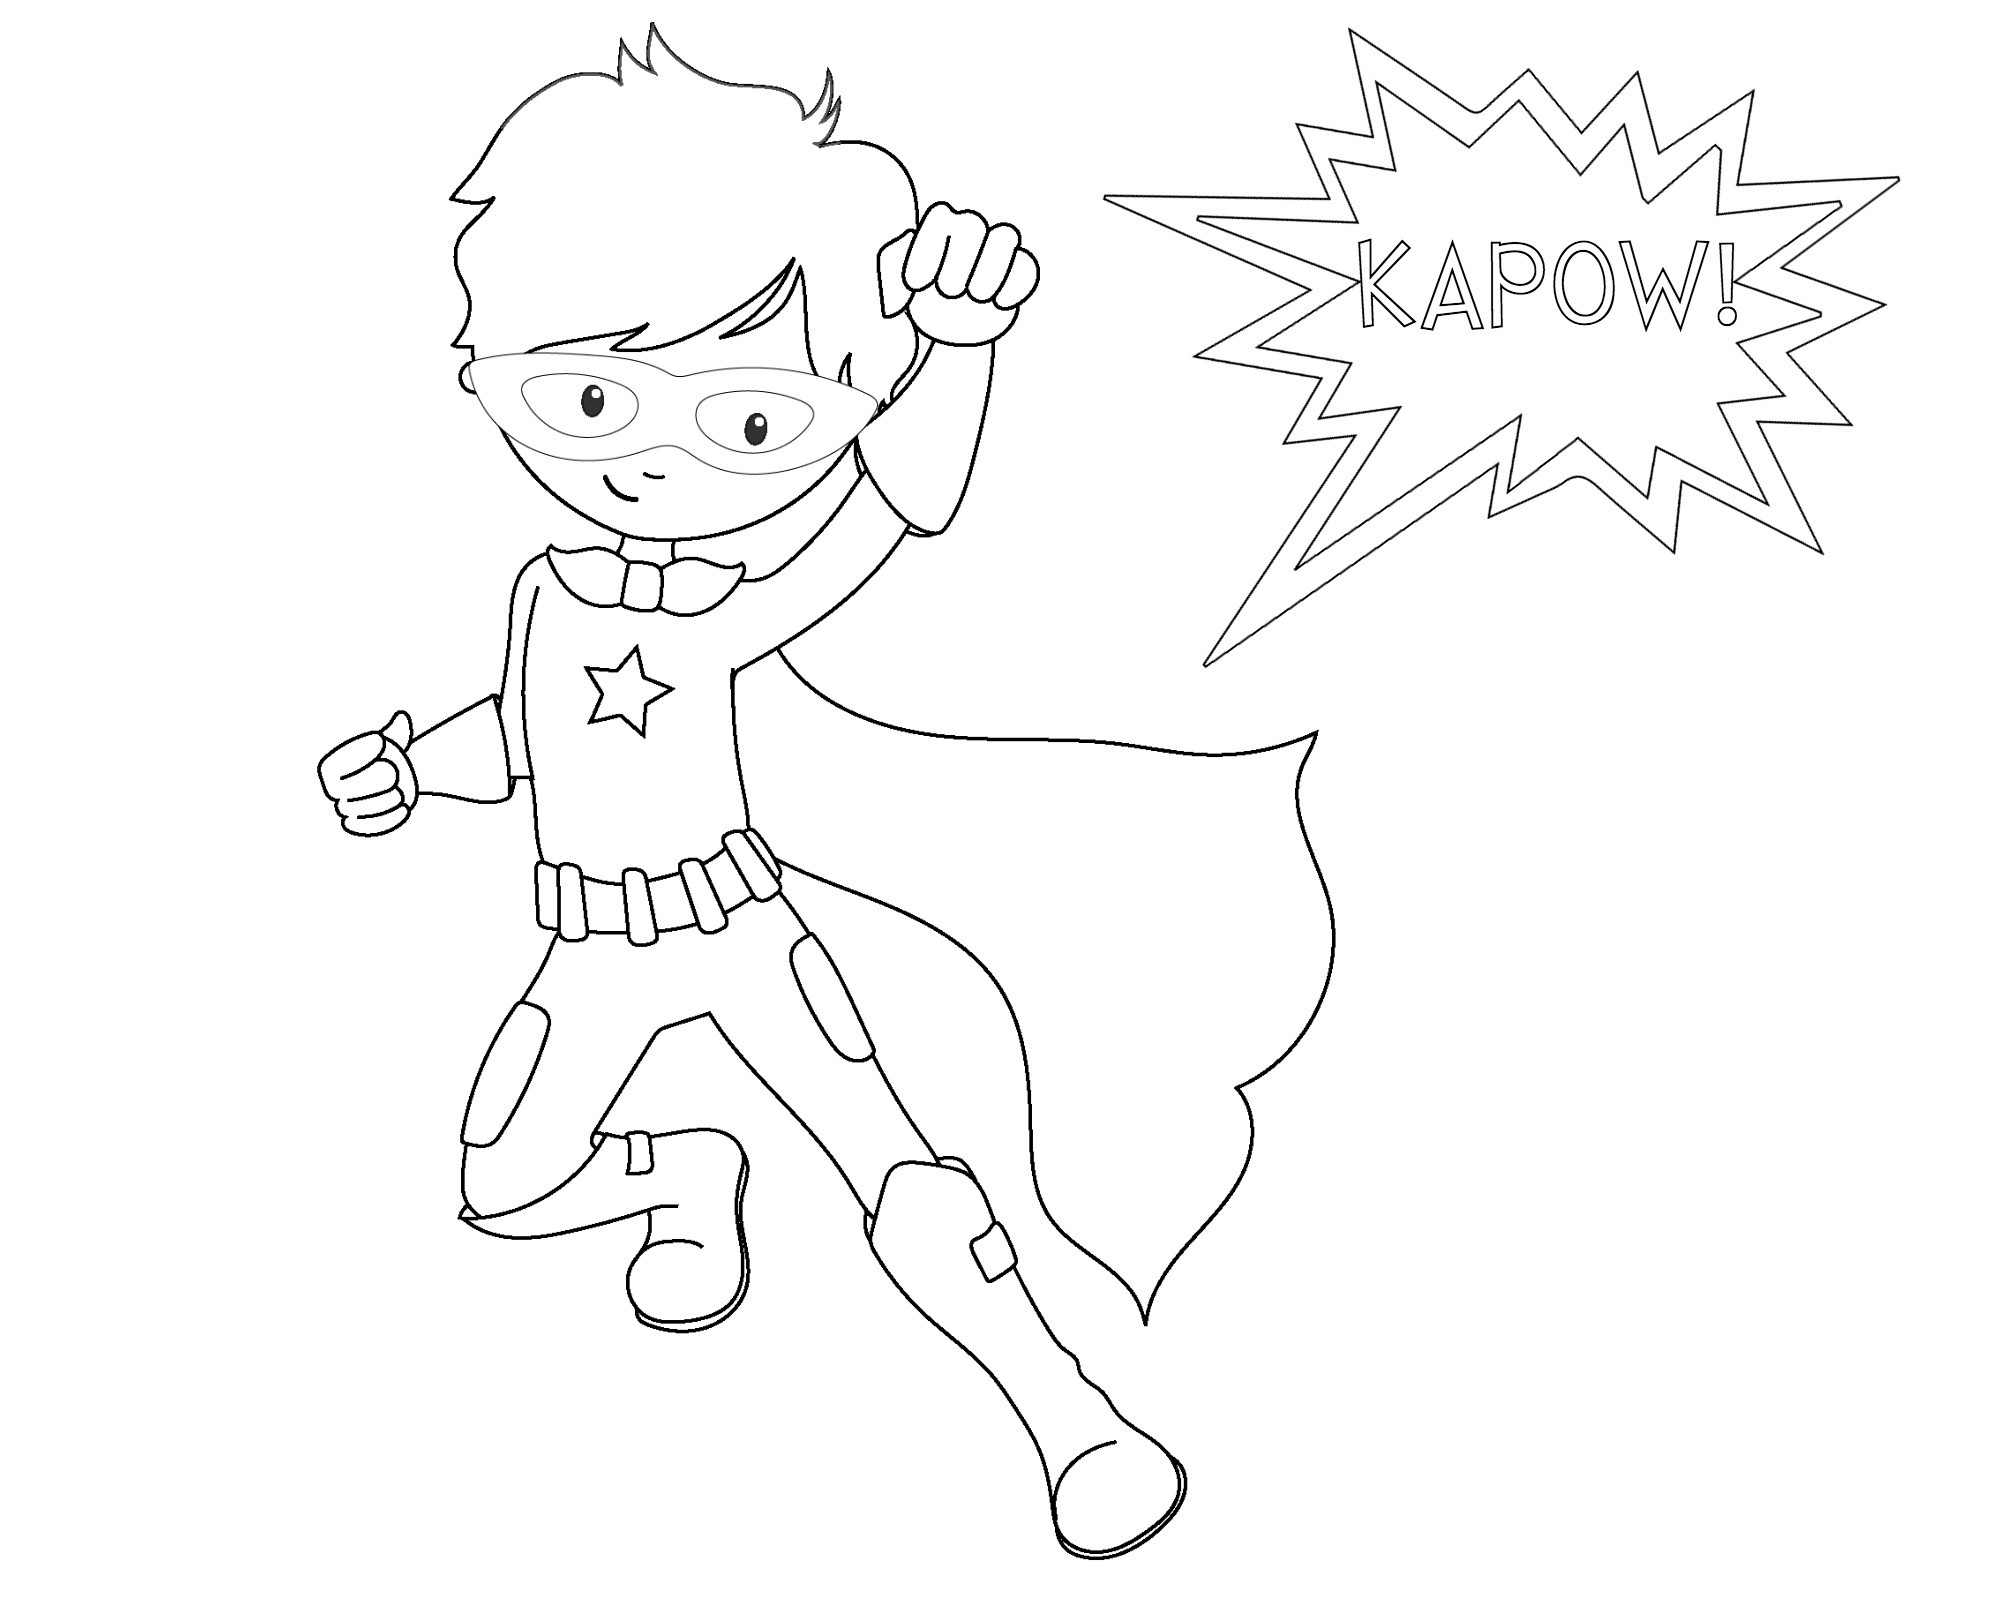 Girl Superhero Coloring Pages Free
 Free Printable Superhero Coloring Sheets for Kids Crazy